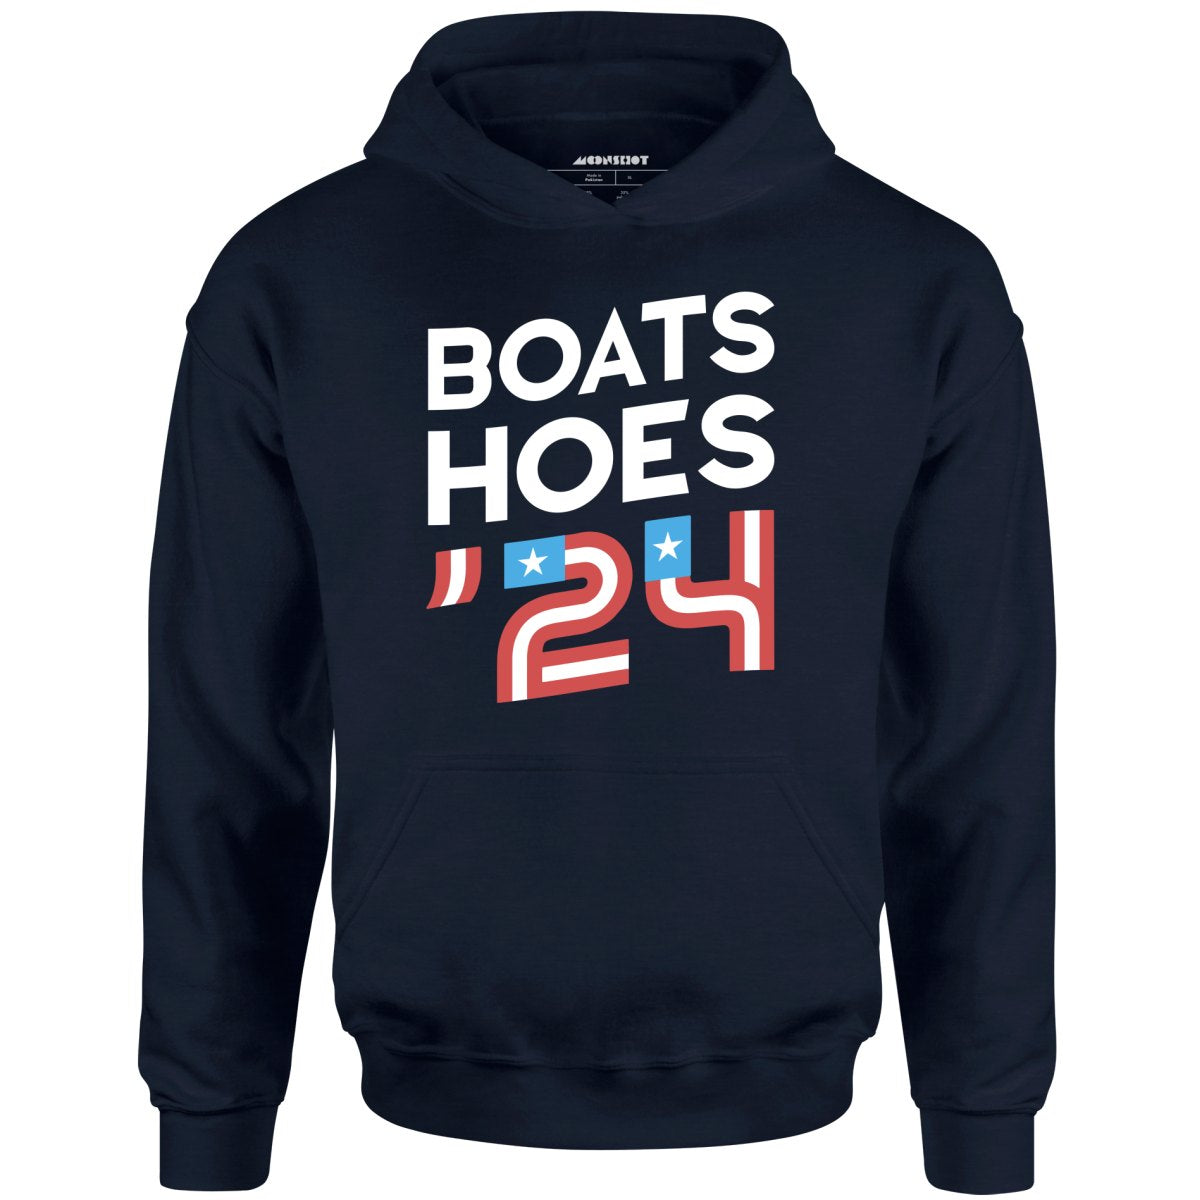 Boats & Hoes '24 - Unisex Hoodie